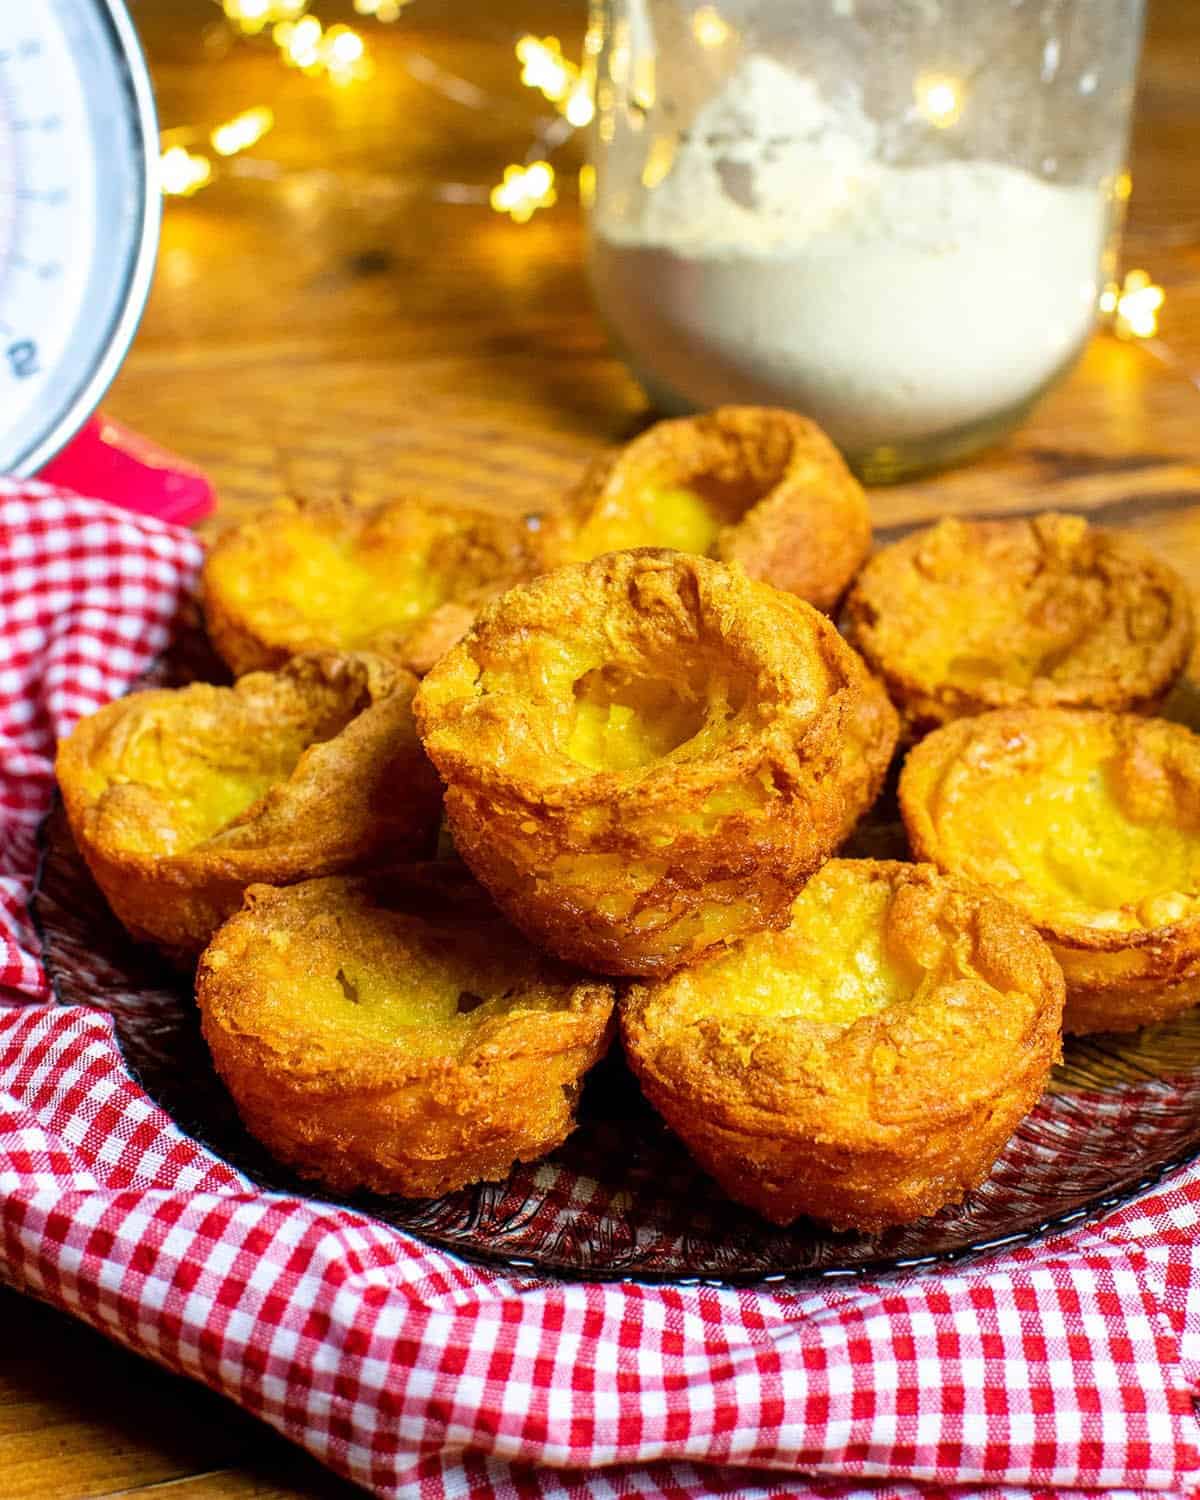 Vegan Yorkshire Puddings on a glass plate with a red and white cloth around it.